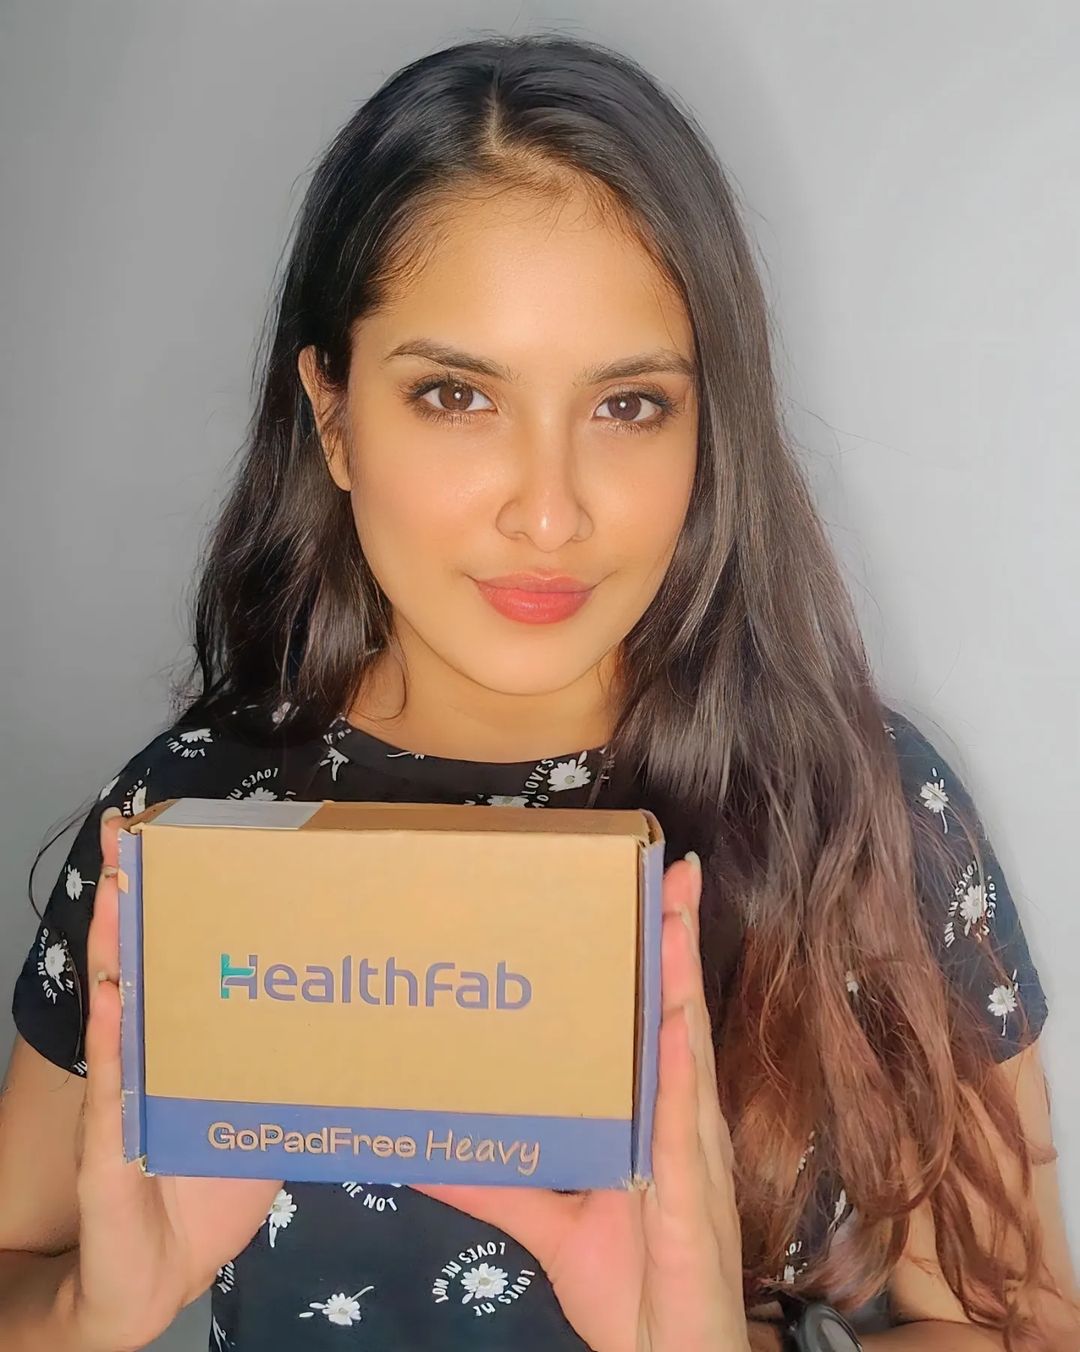 Buy Healthfab The Fabulous You Black Gopadfree Heavy Reusable Leak Proof  Period Panty Usable For 2 Years Without Sanitary Pads - 4Xl Online at Best  Prices in India - JioMart.